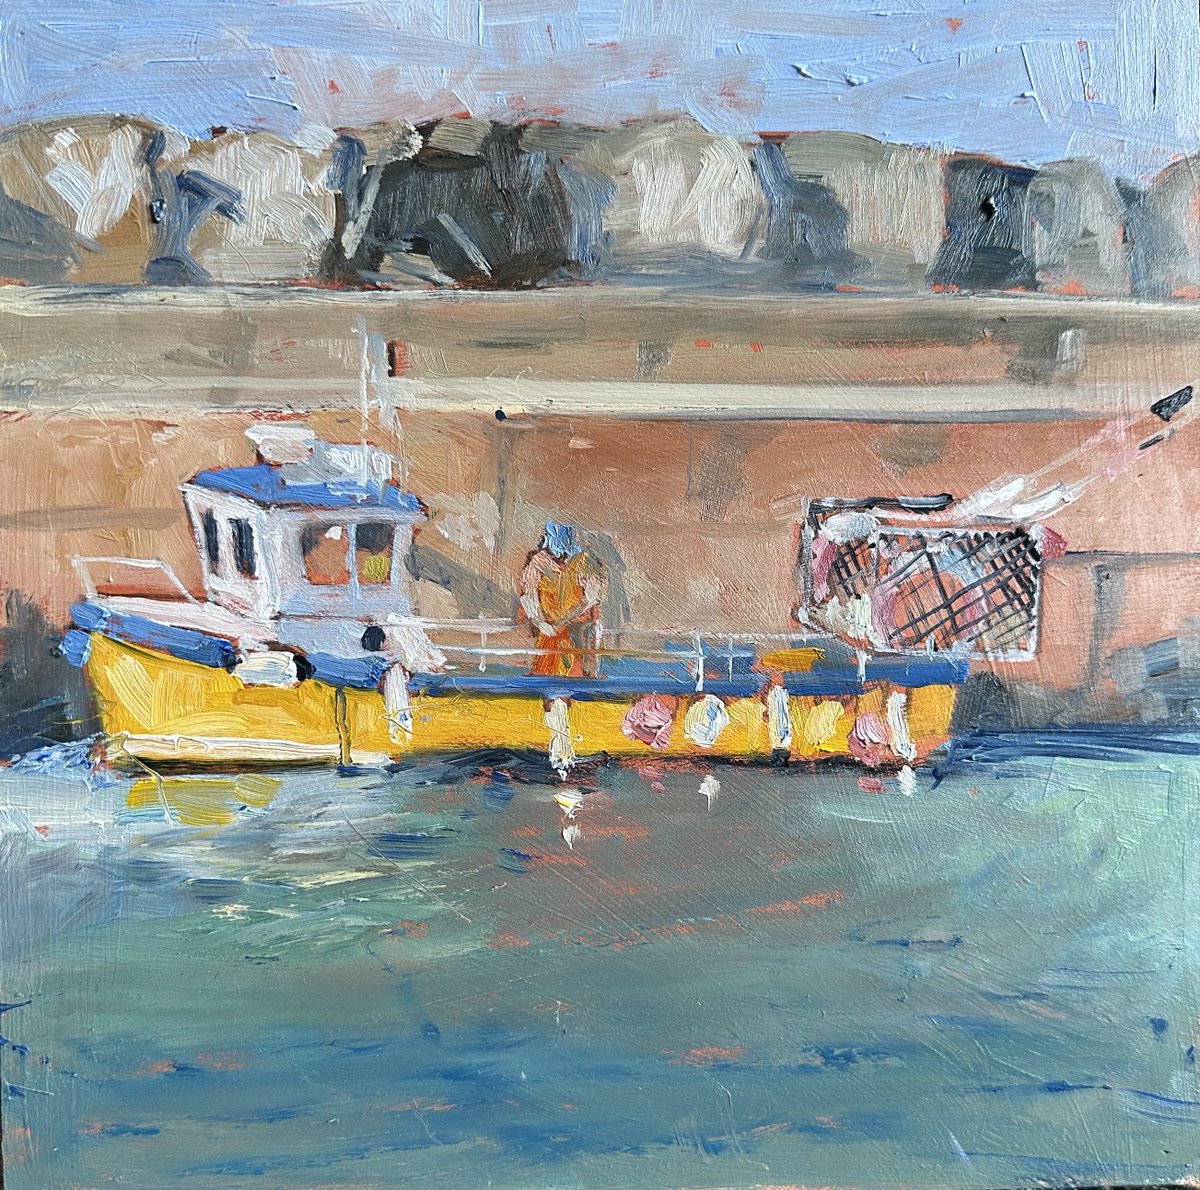 #WIP The Yellow Boat #Staithes #Harbour #lastcatchoftheday #fishing #boat #oils 10x10” #woodtray